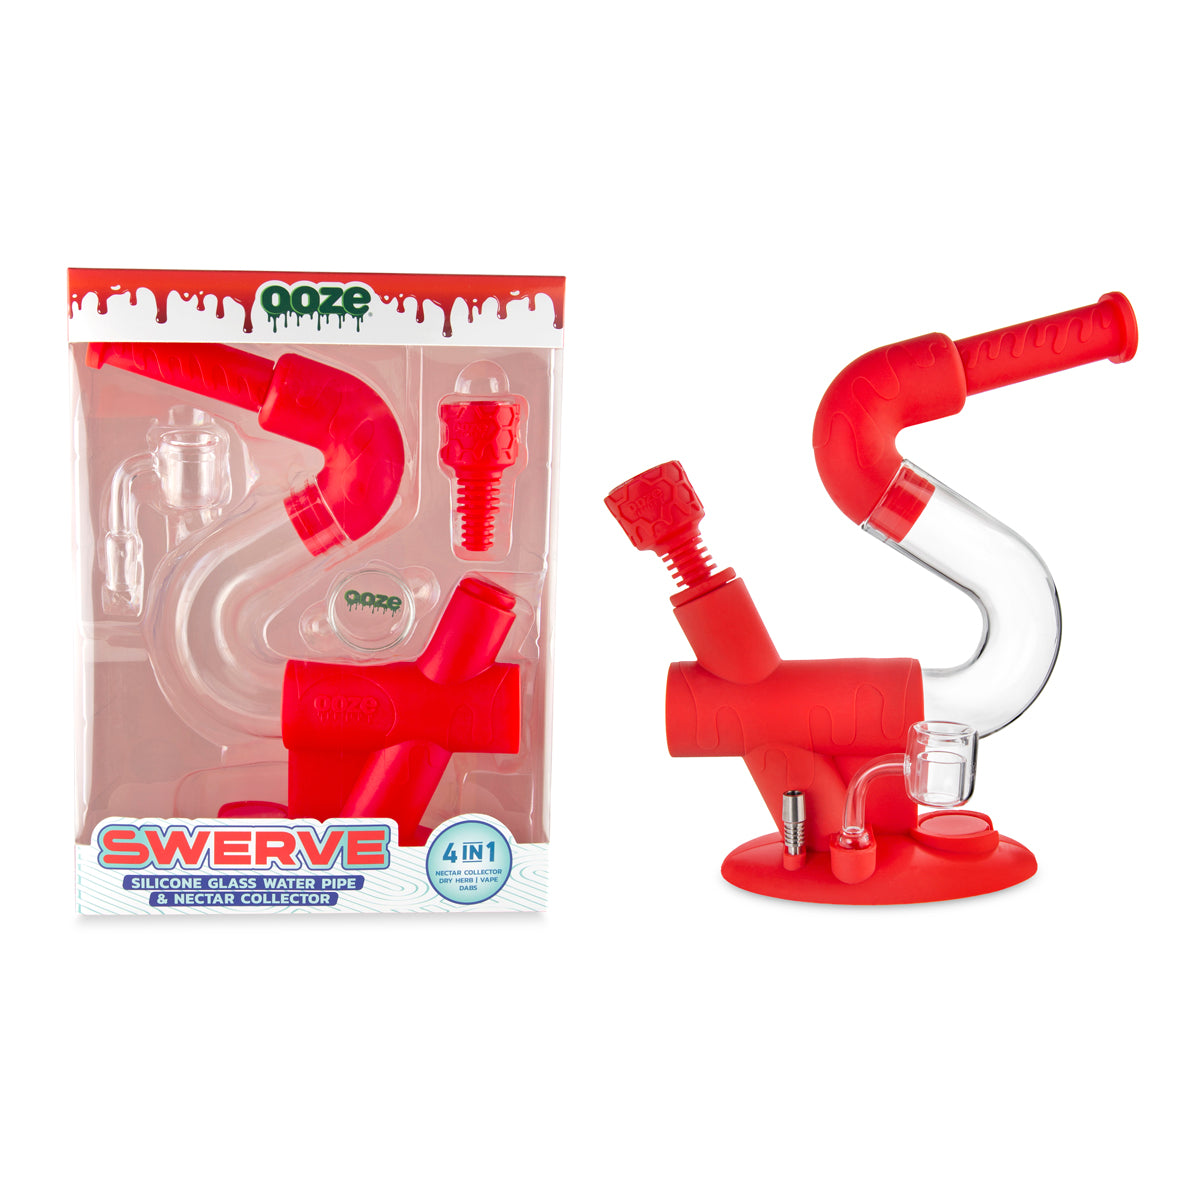 4 Water Bubbler with Silicone Hose - Electric Nectar Collector Mini Kit